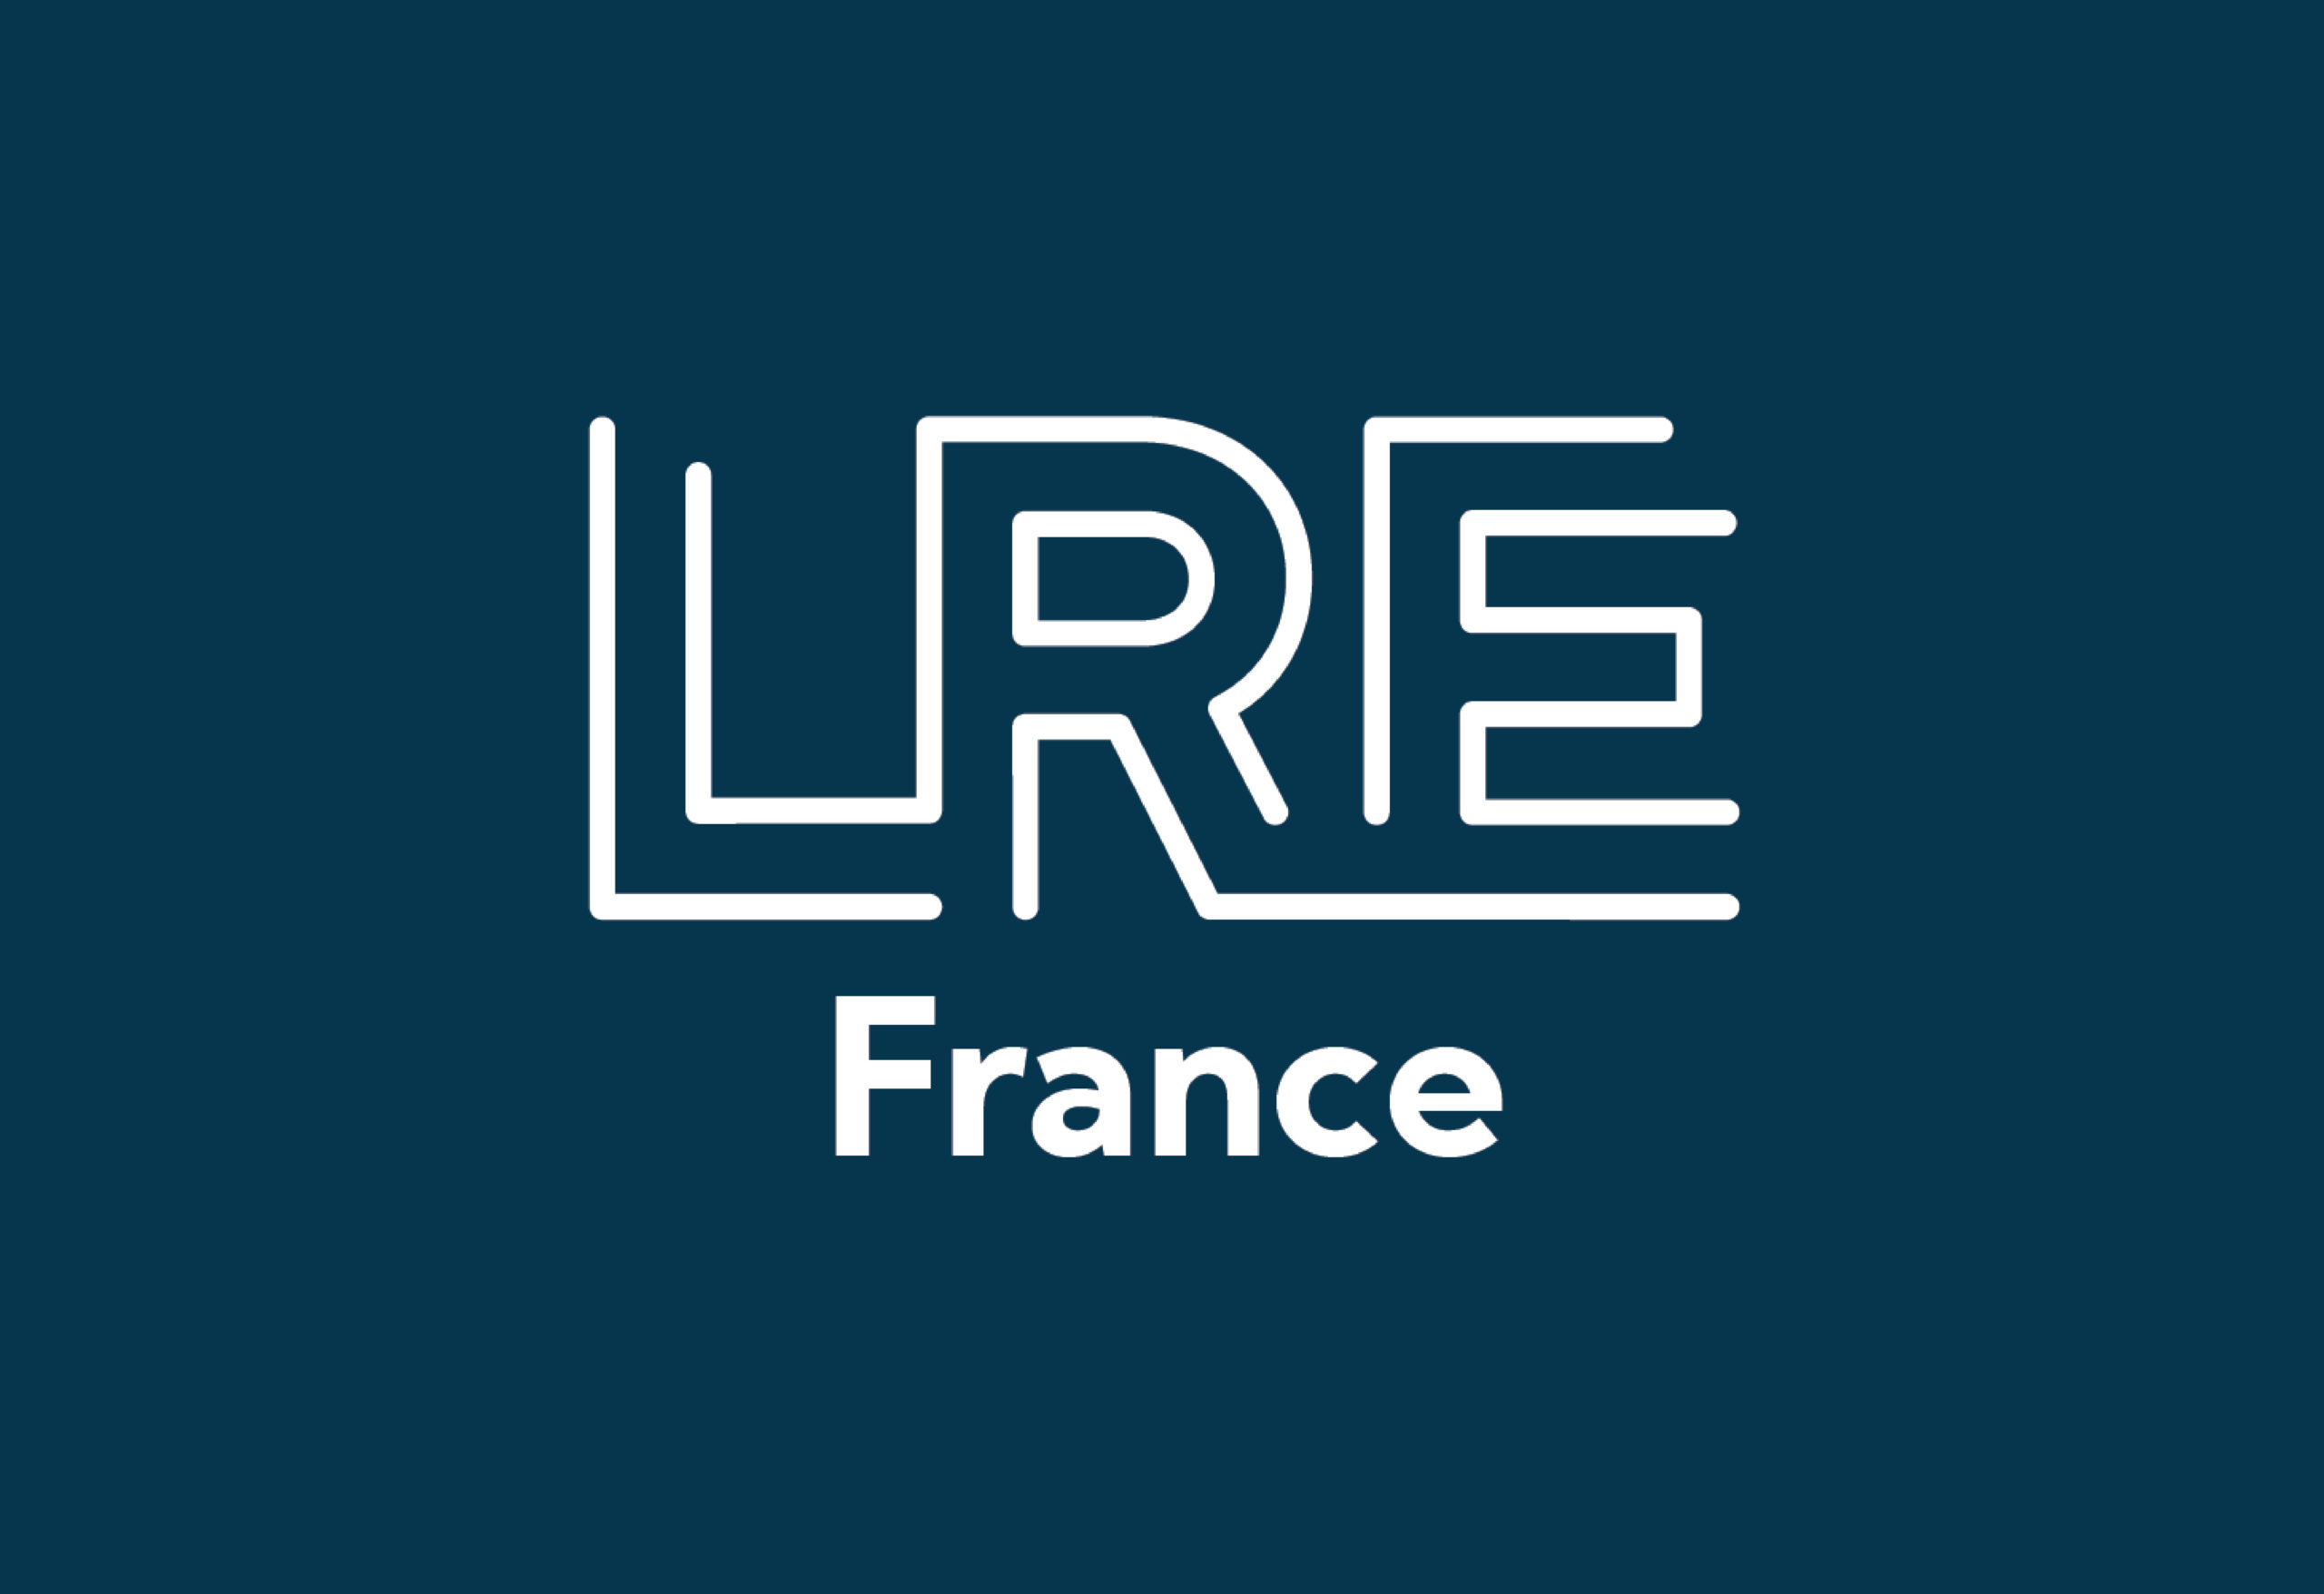 LRE France is the new operational branch of the LRE Foundation